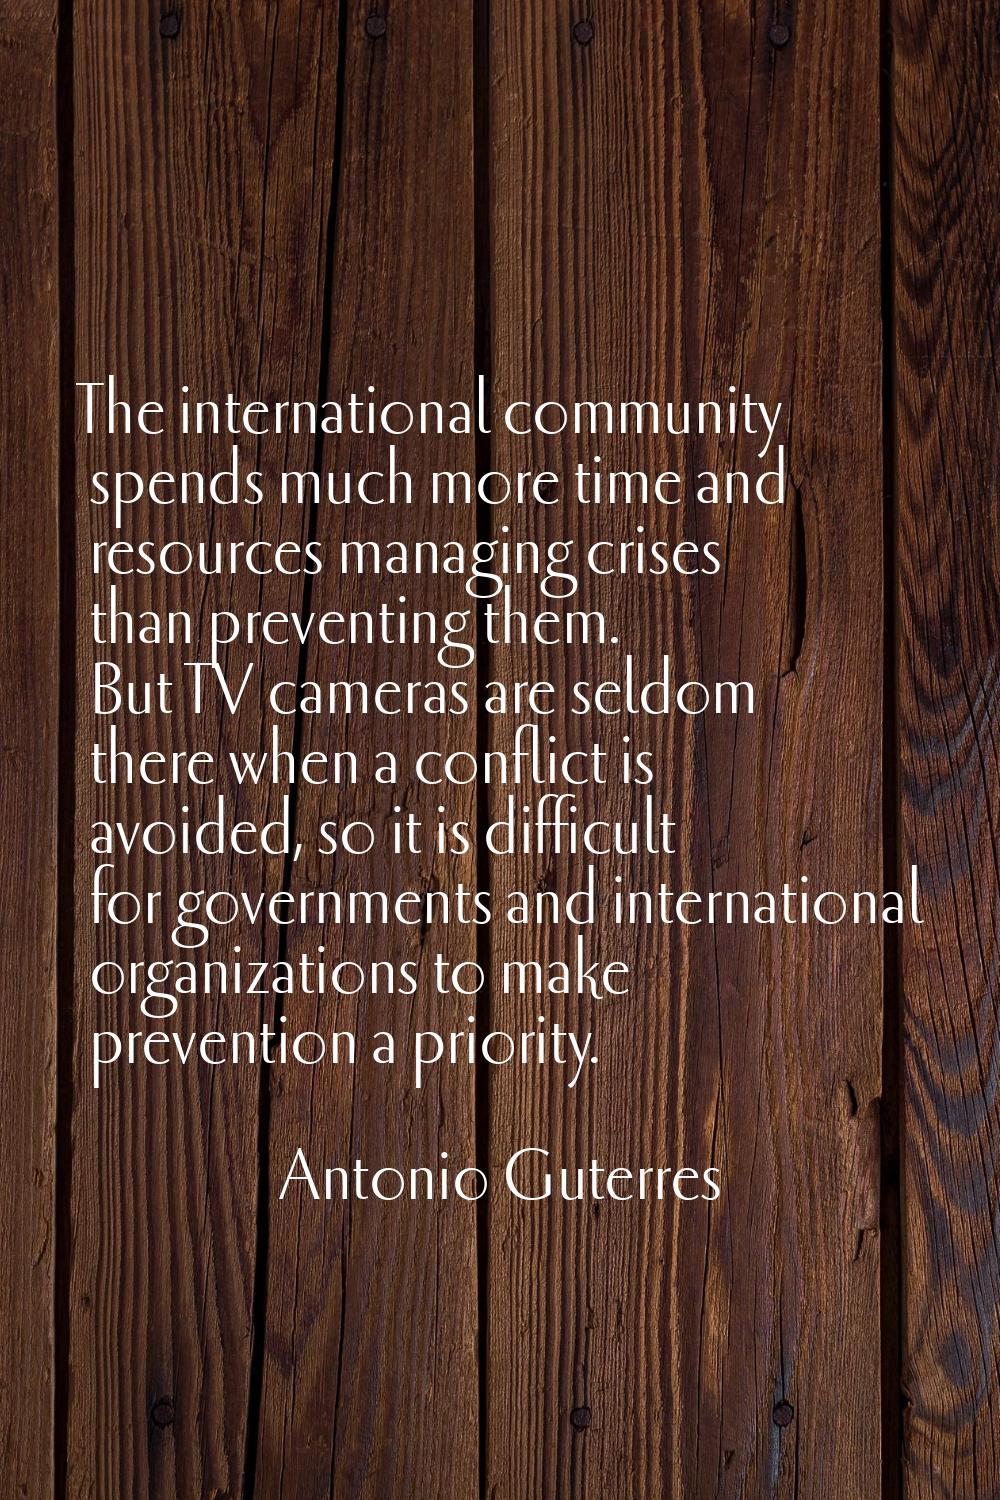 The international community spends much more time and resources managing crises than preventing the